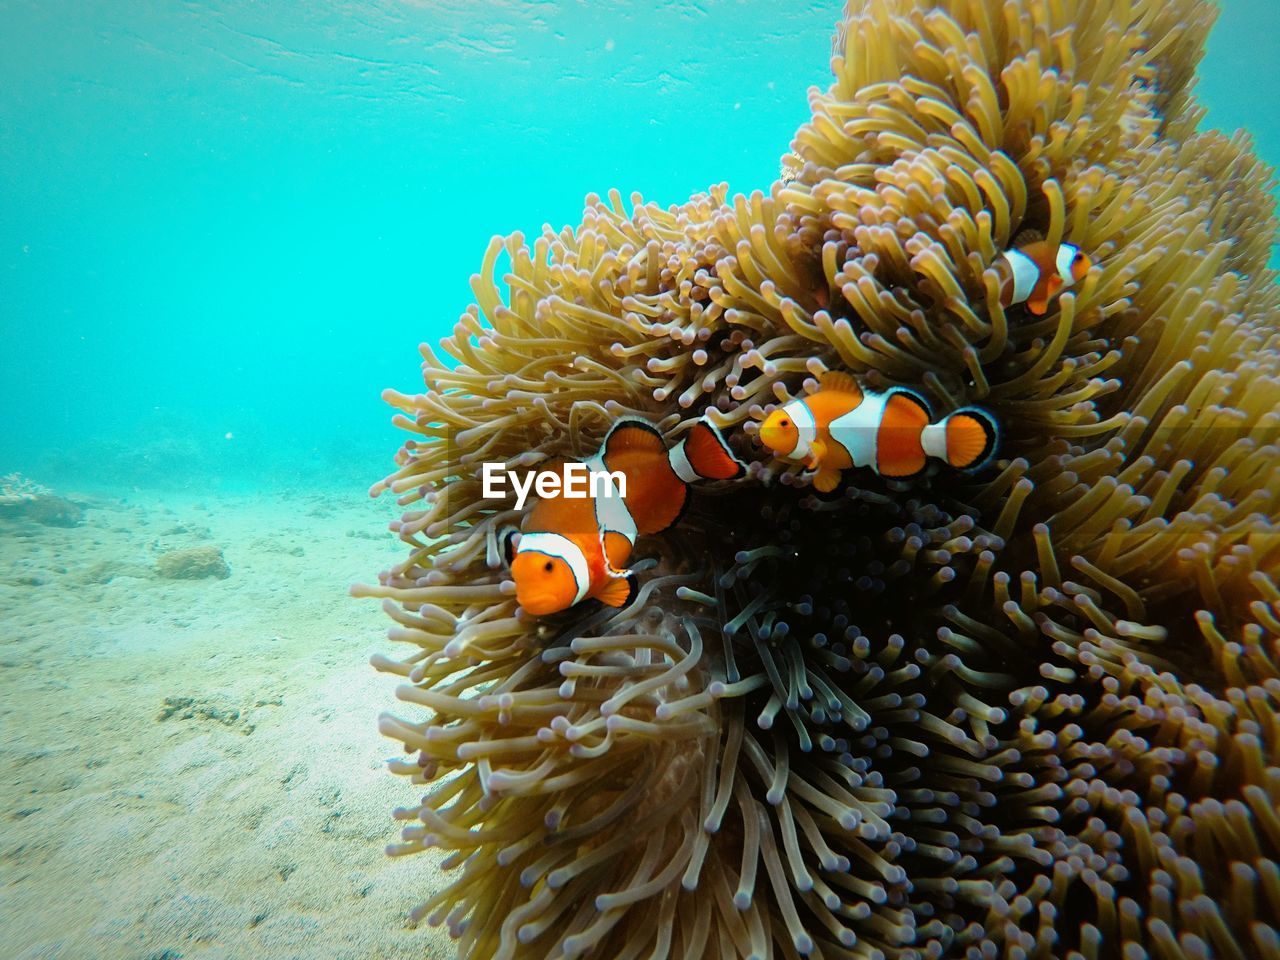 Nemo finds his family back